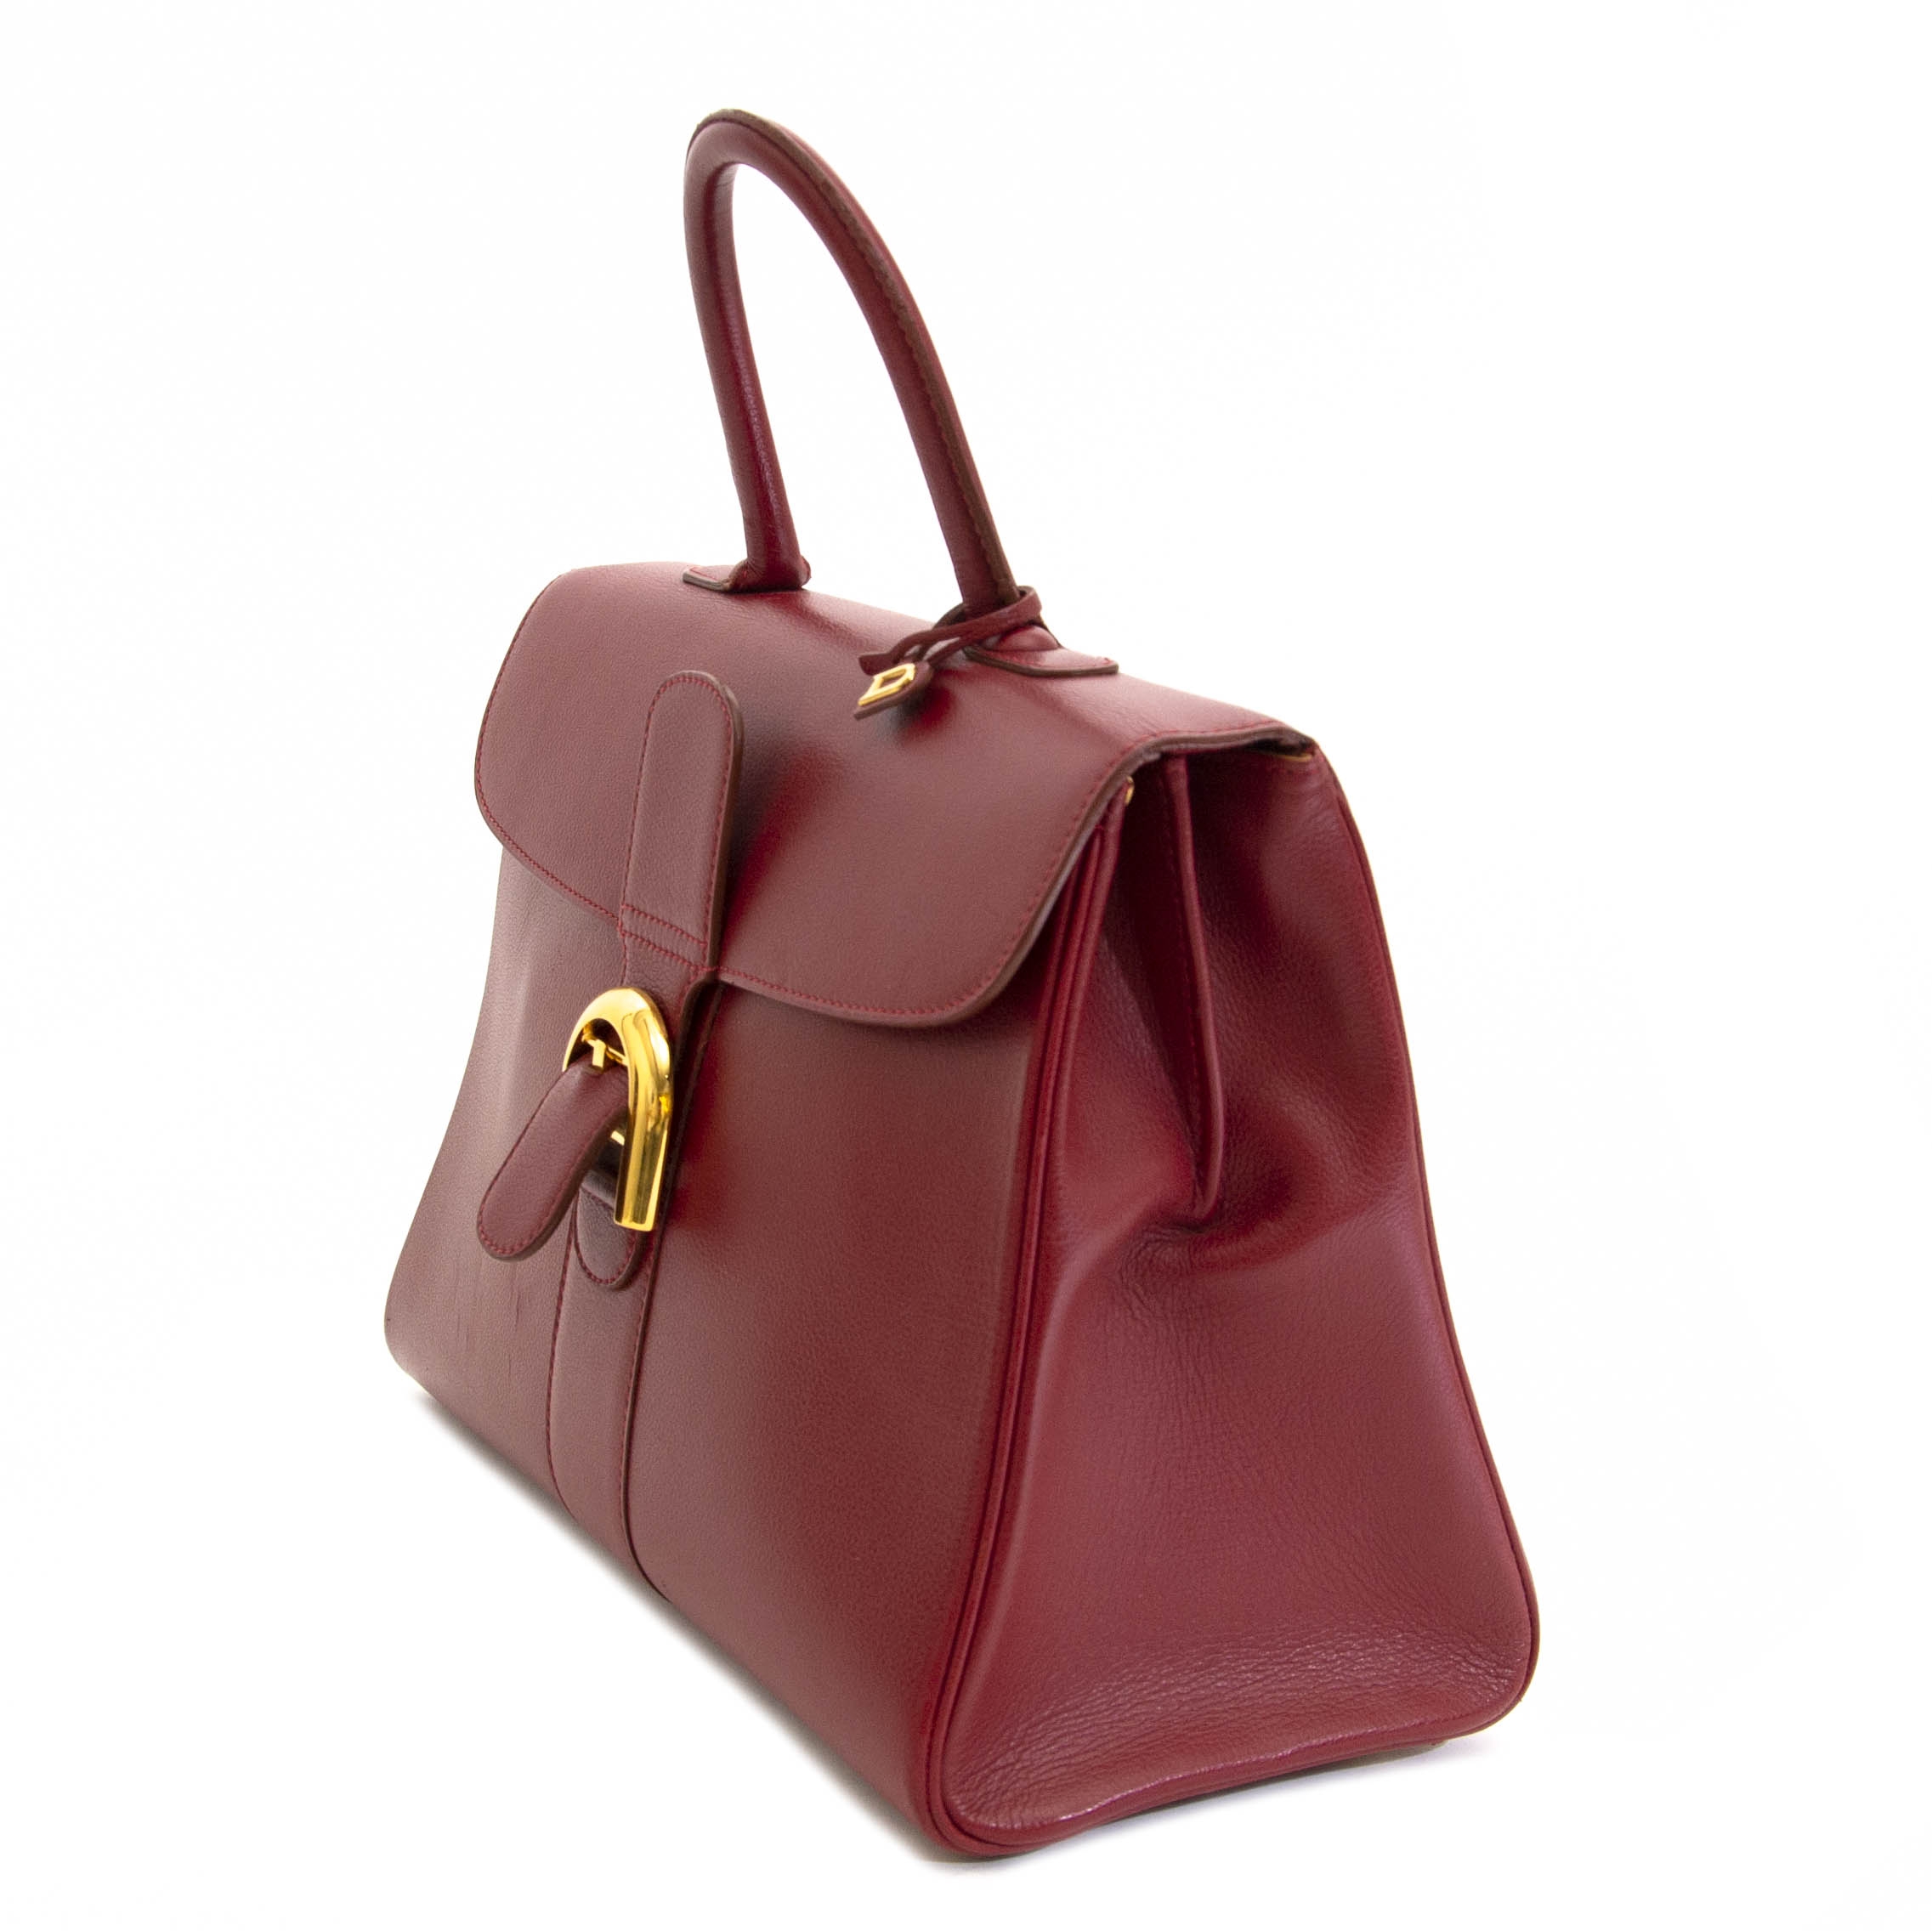 Delvaux Red Brillant GM ○ Labellov ○ Buy and Sell Authentic Luxury